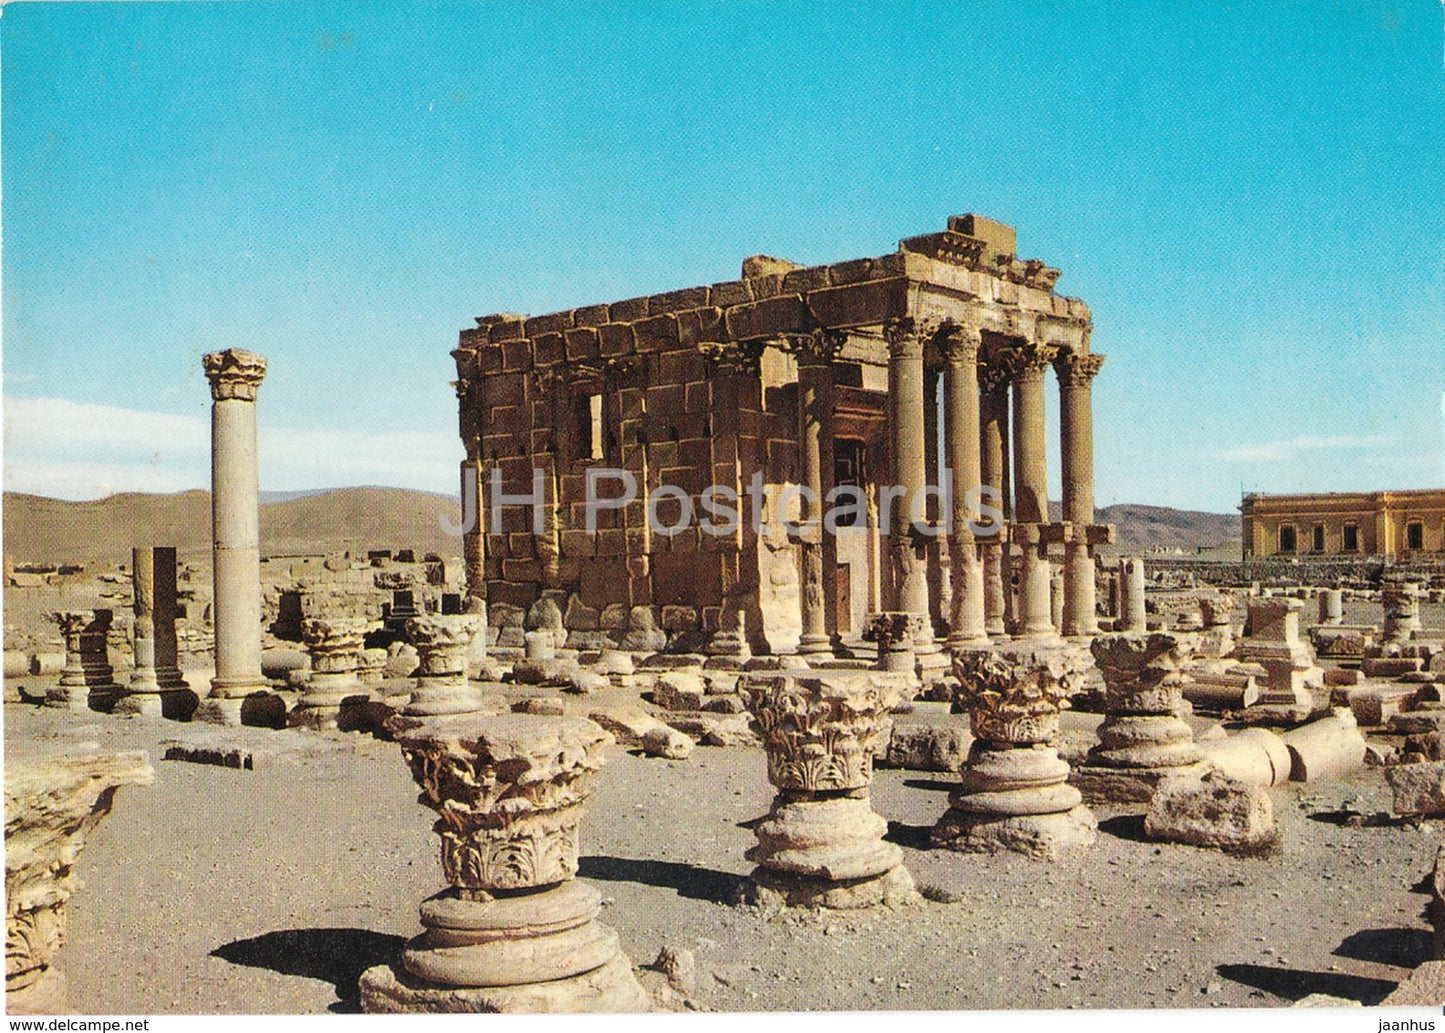 Palmyra - Temple of Baal - Shamin - ancient world - ruins - archaeology - Syria - used - JH Postcards